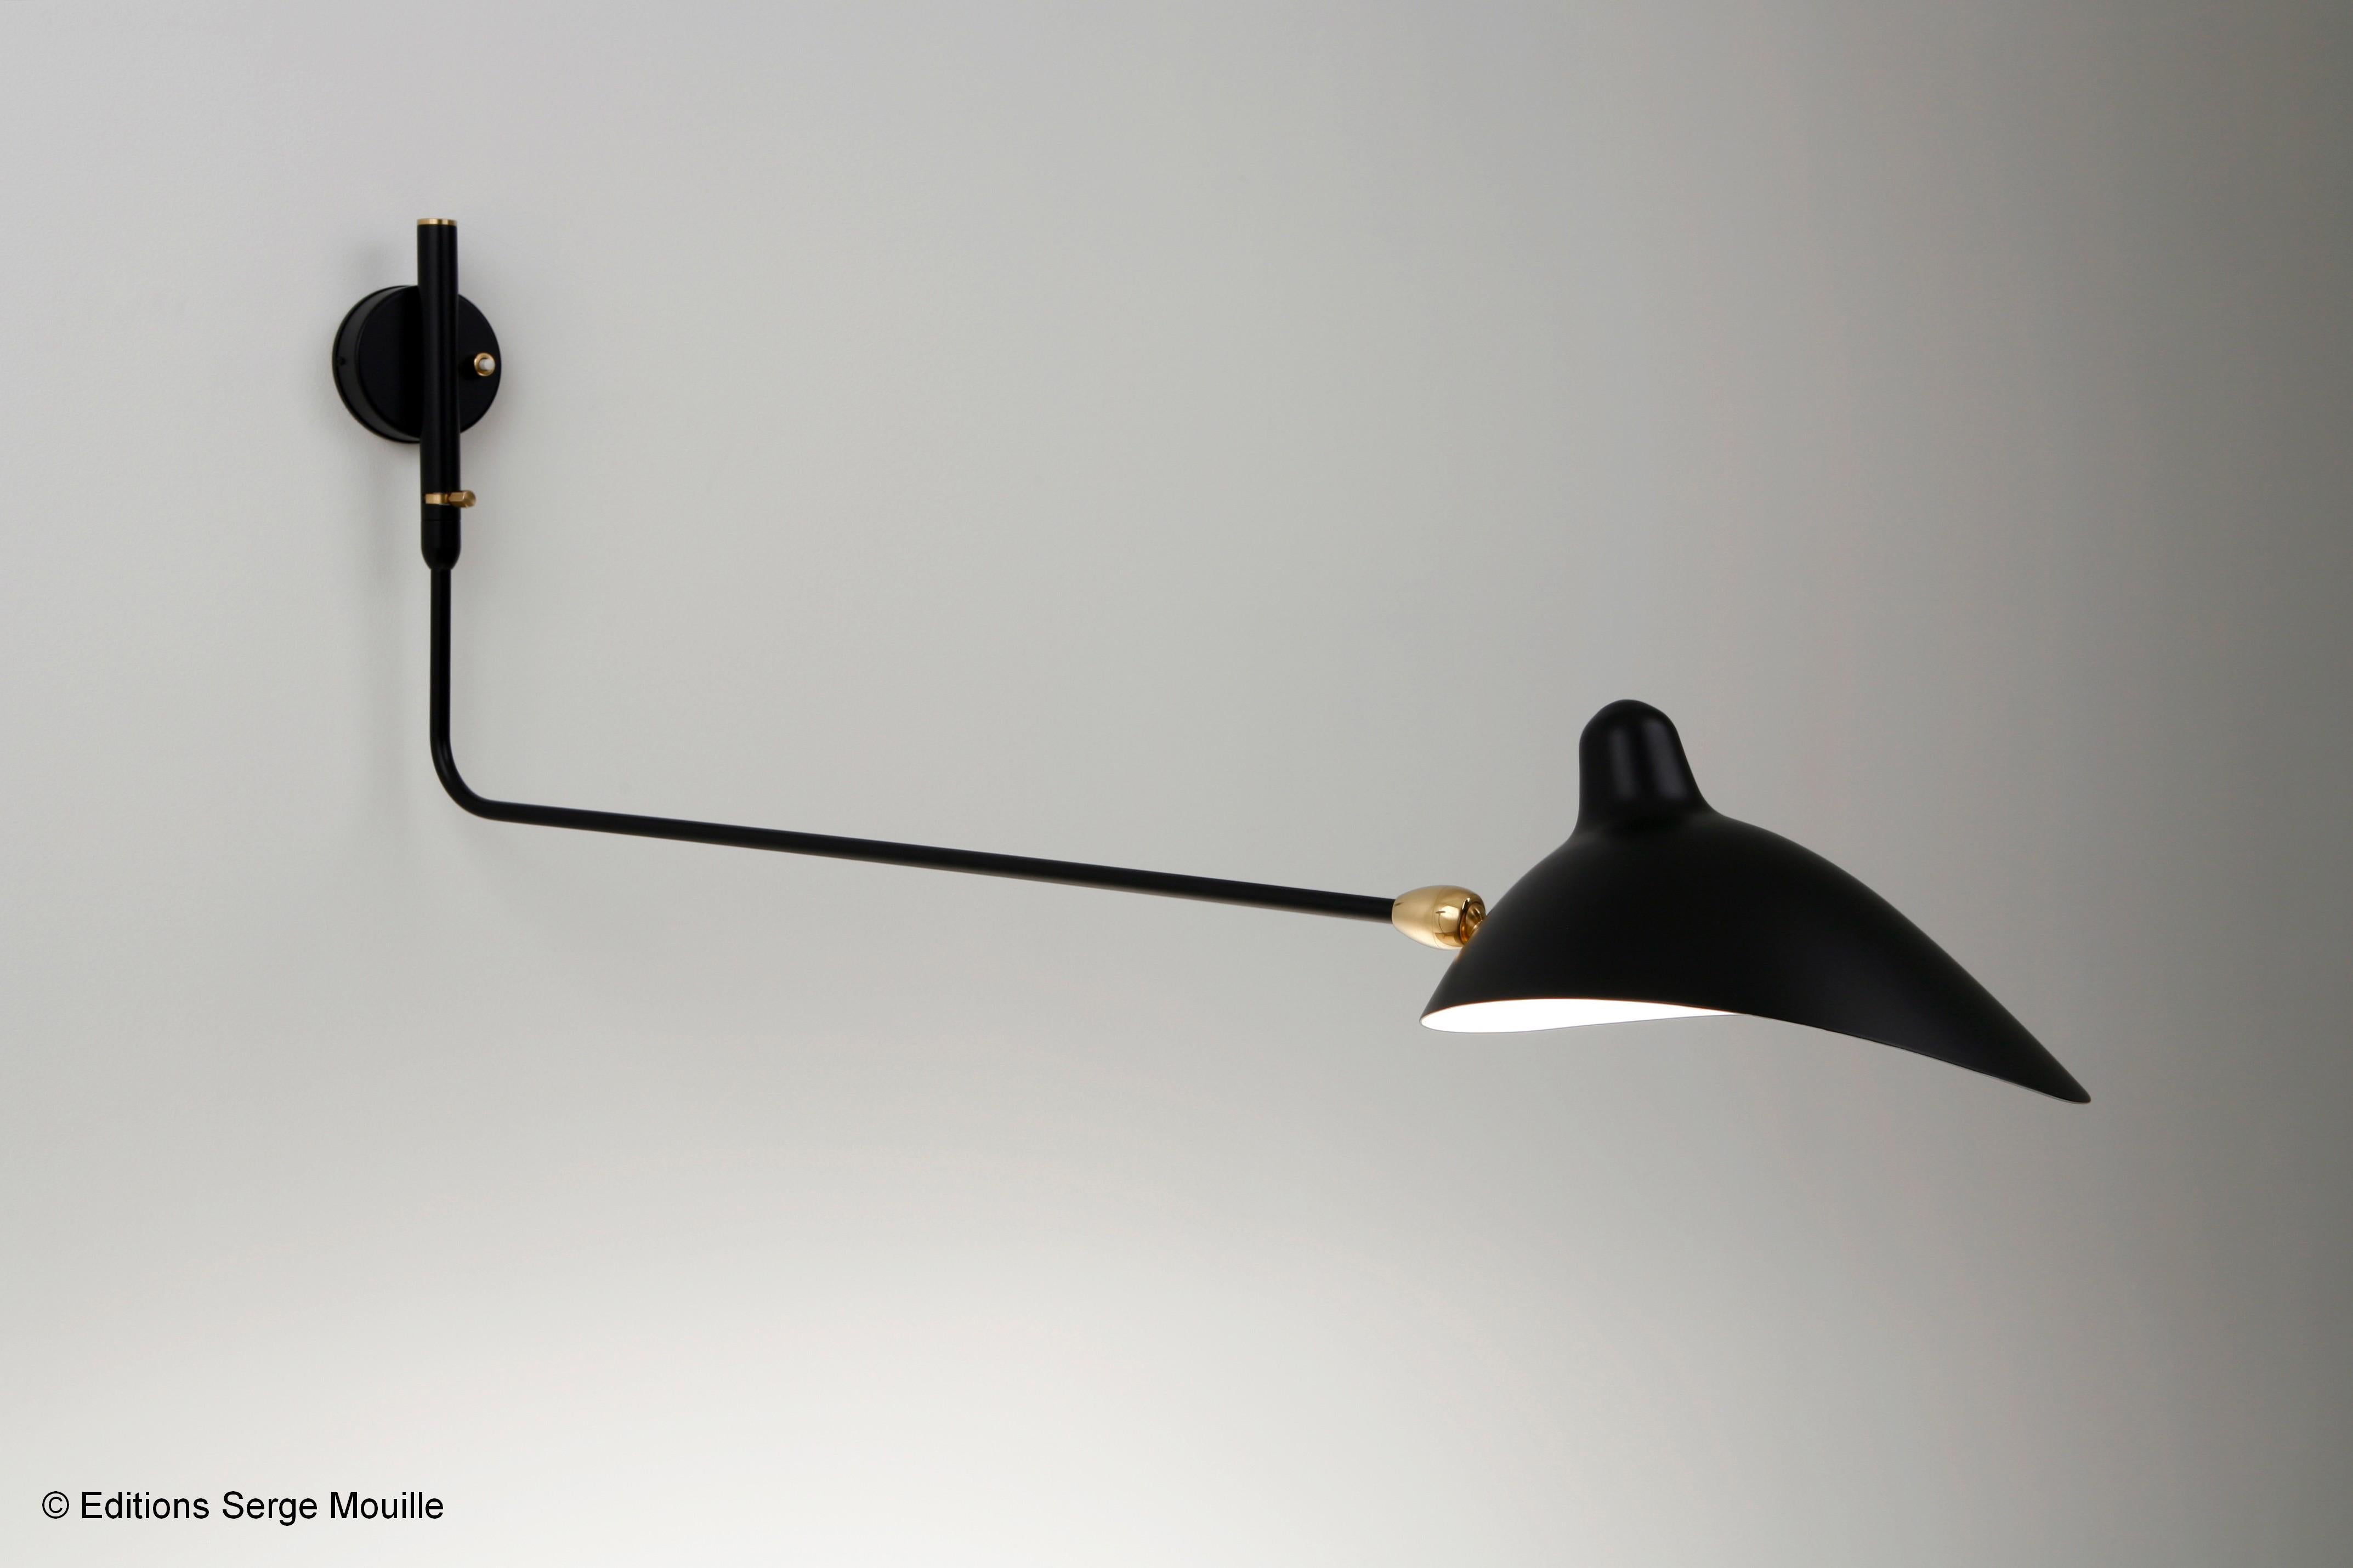 Sconce 1 rotating straight arm by Serge Mouille
Dimensions: D 96 x H 36 cm
Materials: Brass, steel, aluminum
One of a King. Numbered.
Also available in different color.

All our lamps can be wired according to each country. If sold to the USA